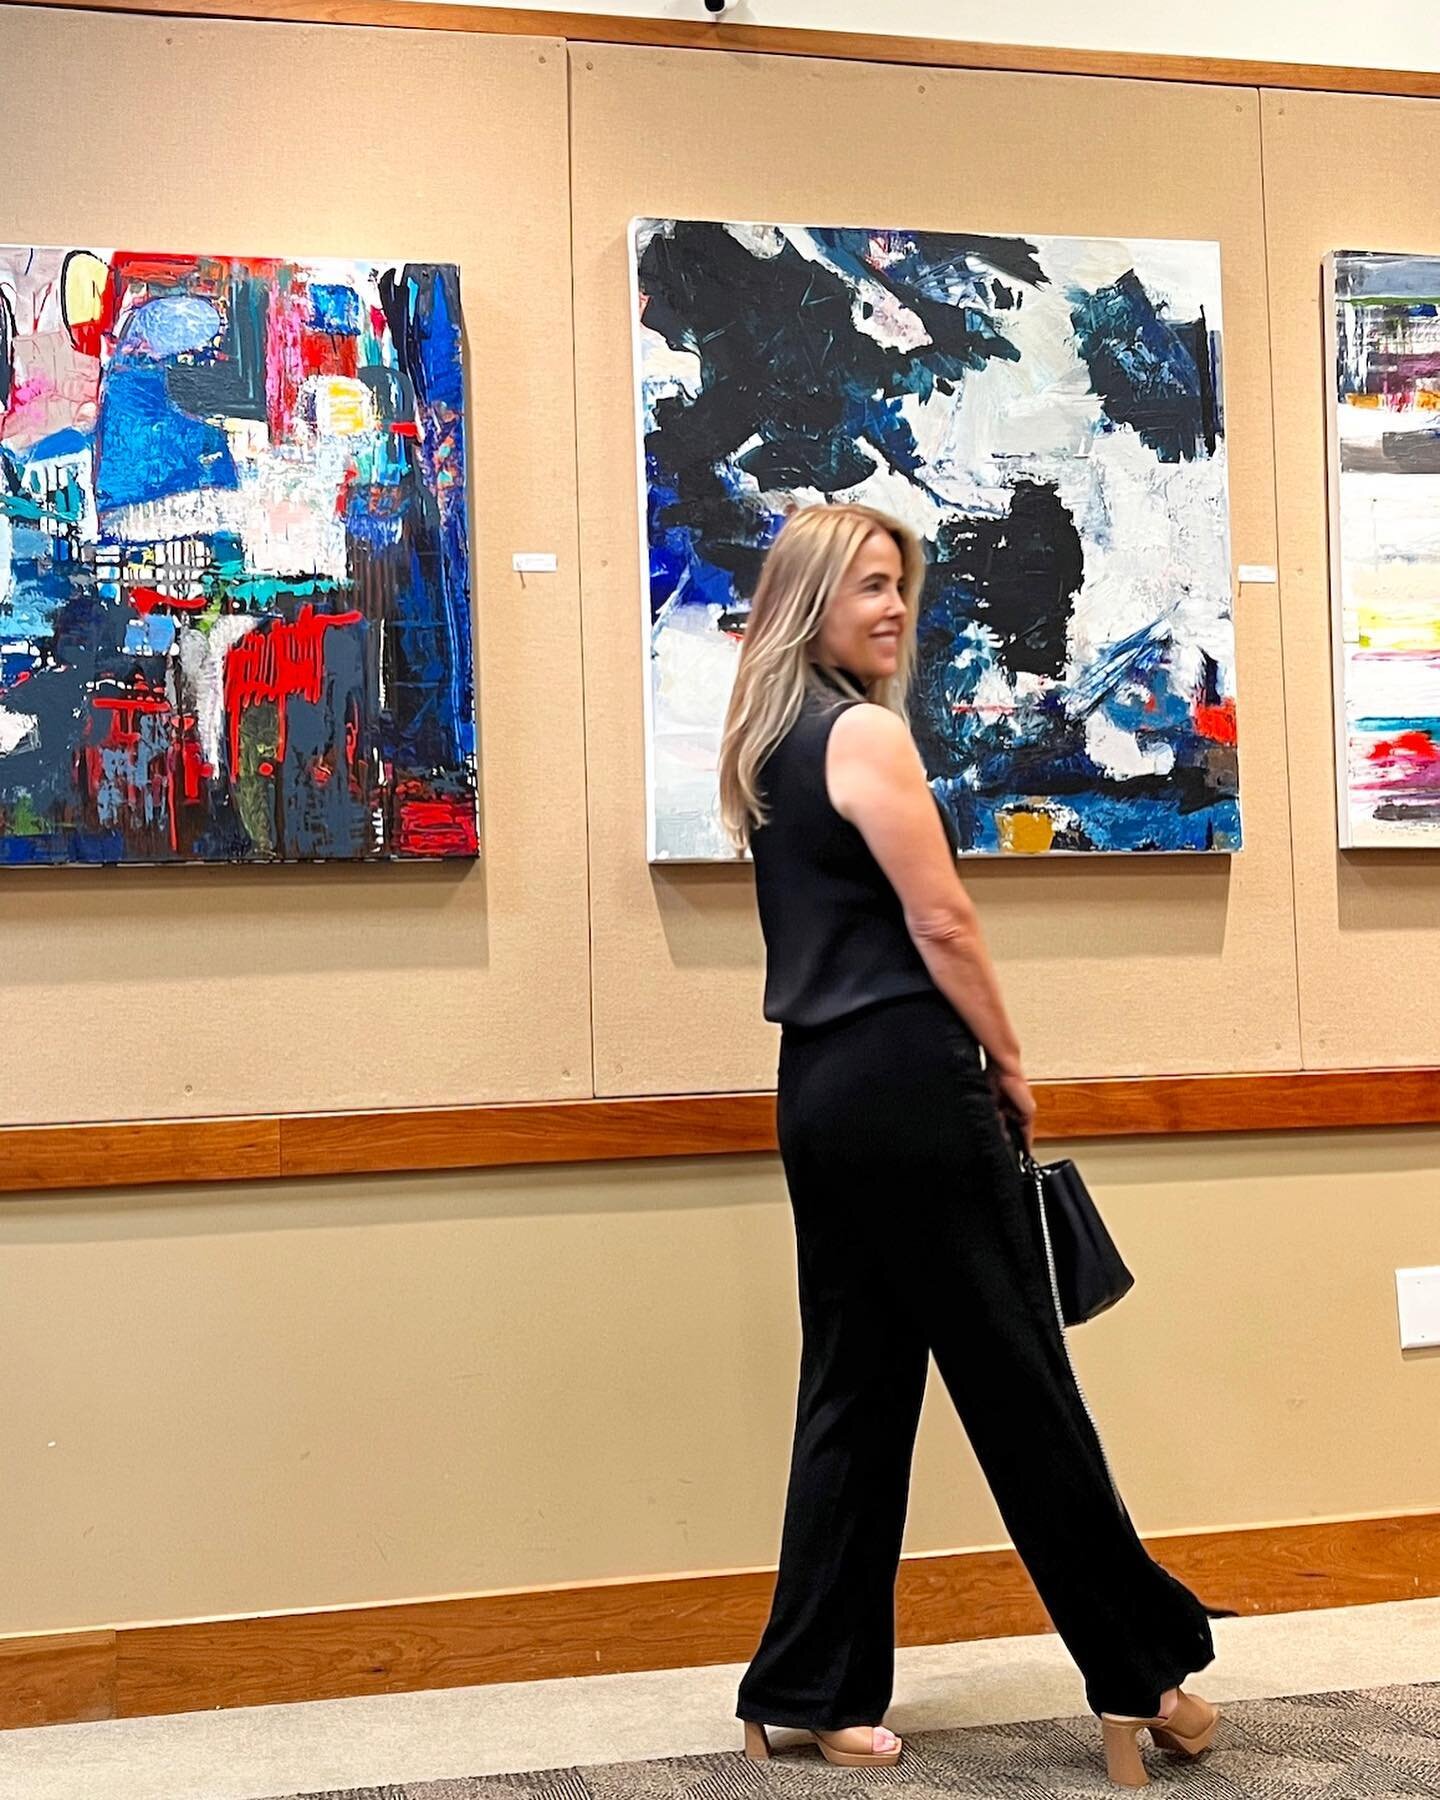 At my solo exhibition with some of my paintings. 
@gwlibrary Cos Cob till July 1st

#colorfulabstractart #supportfemaleartists #bigcanvasart #newabstract #anelisaart #anelisacalmet #abstracto #abstraktekunst #artgallerynyc #artandfashion #singulart #